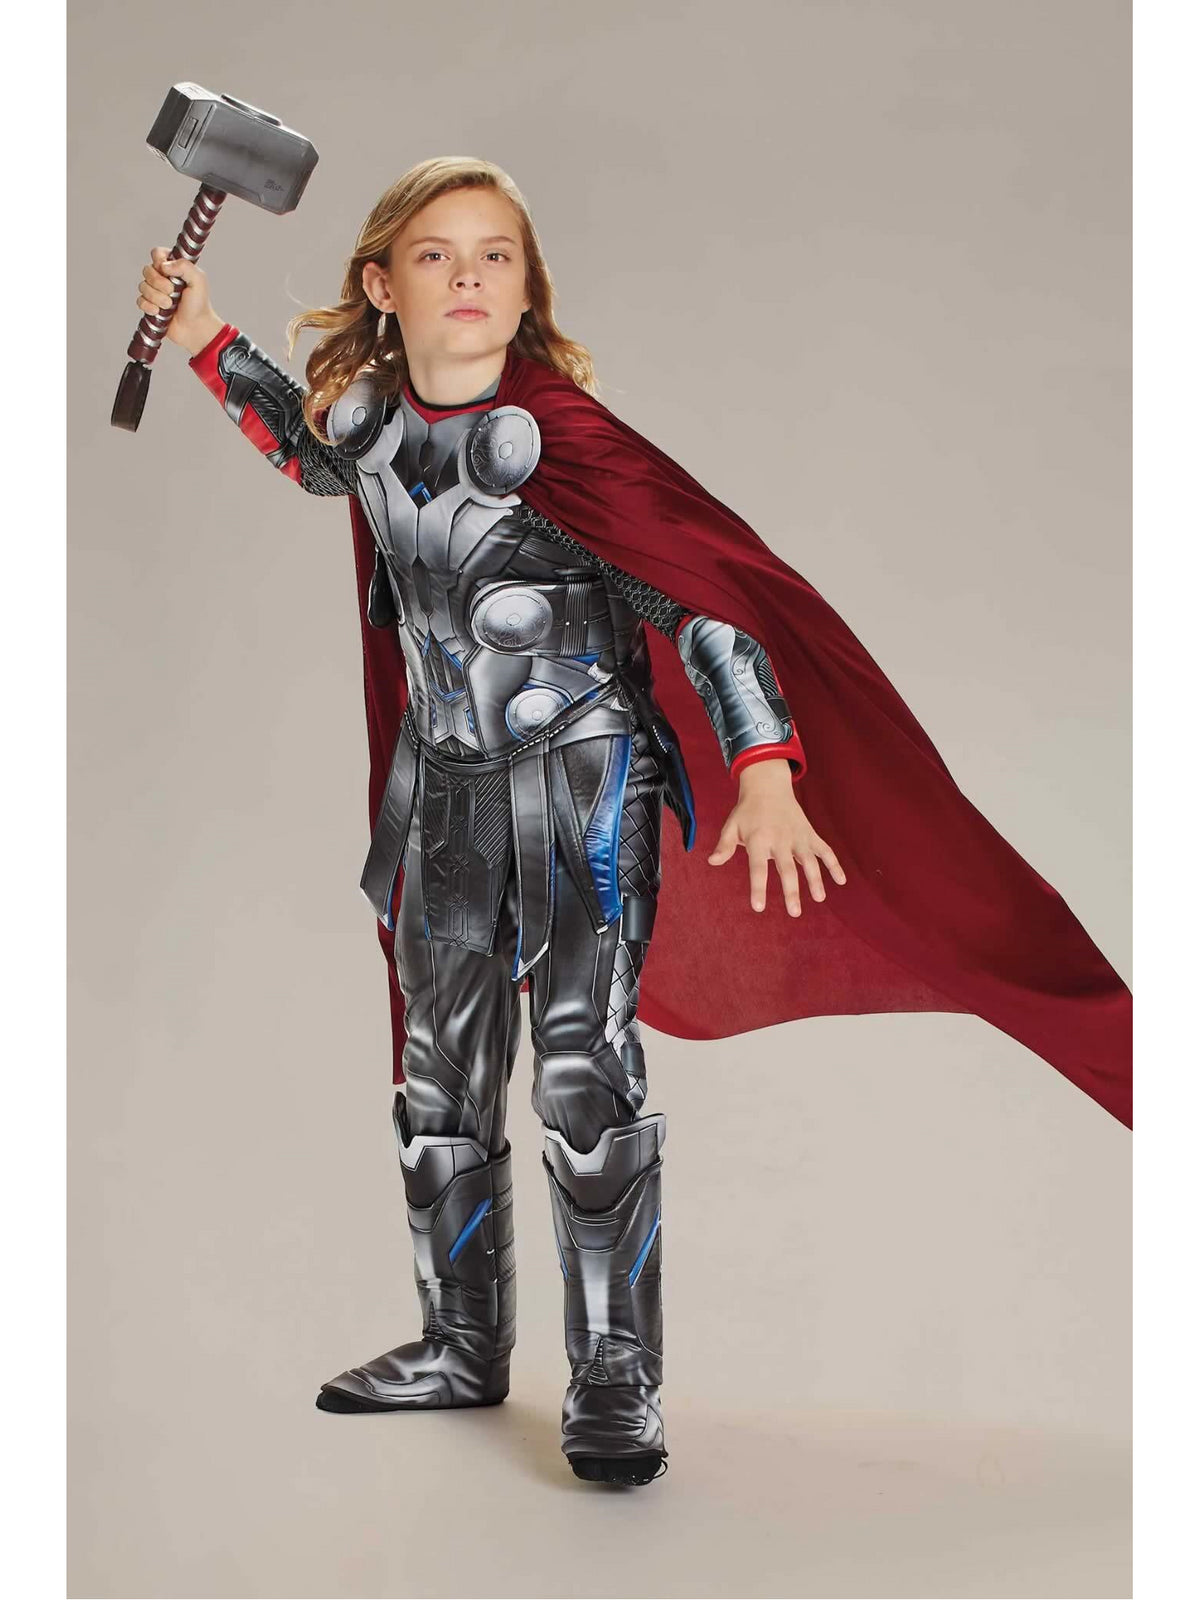 Ultimate Thor Costume for Kids - Chasing Fireflies